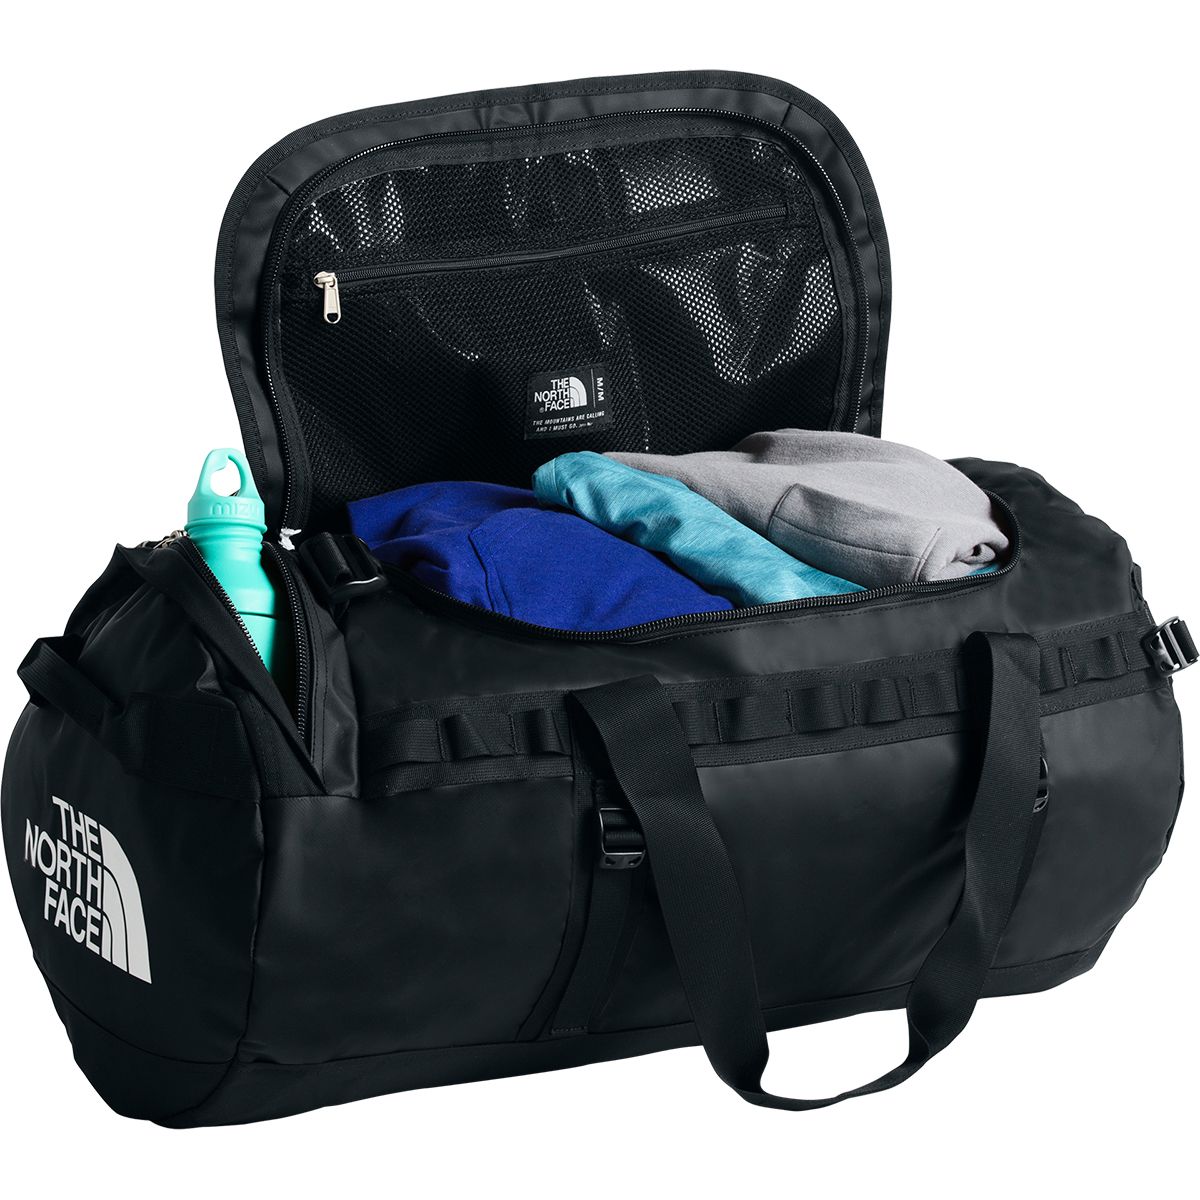 Face camp. Сумка the North face Base Camp Duffel. Баул the North face Base Camp Duffel. Баул the North face Base Camp. Баул the North face m.